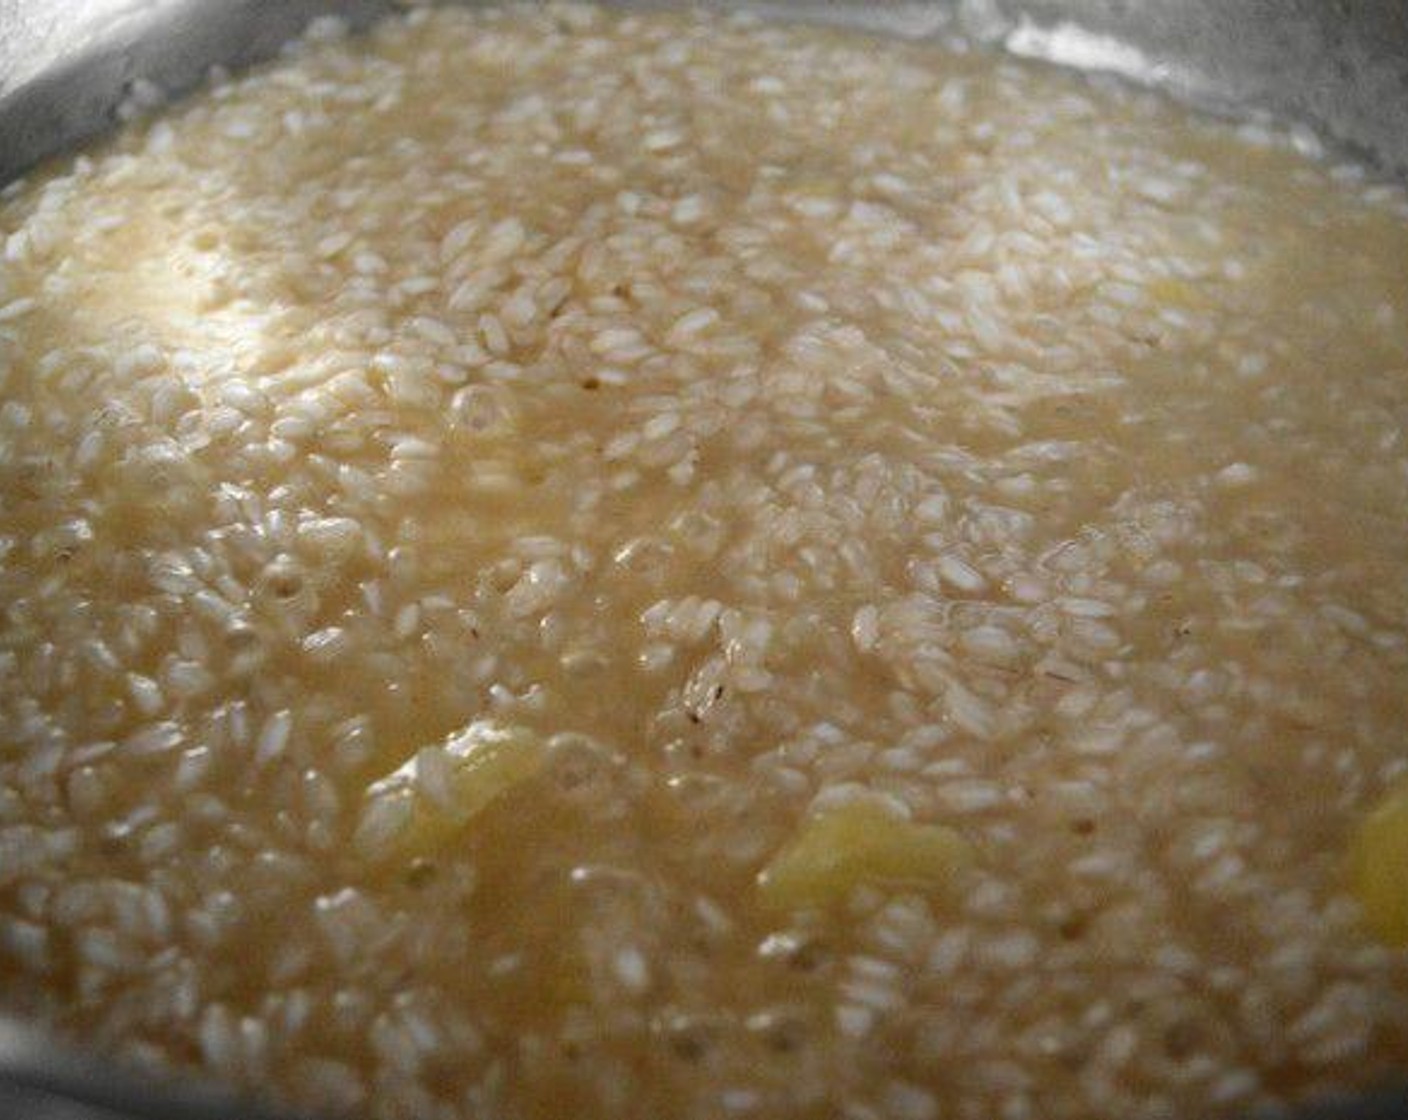 step 3 Pour the Pineapple Juice (1/2 cup) into the pan and let it completely get absorbed by the rice, about 2-3 minutes. While that happens add in the Salt (1 pinch) and Ground Cinnamon (1/4 tsp) for flavor. Also get a small pot on the stove with the Chicken Stock (2 3/4 cups) in it and just warm it up on low heat.